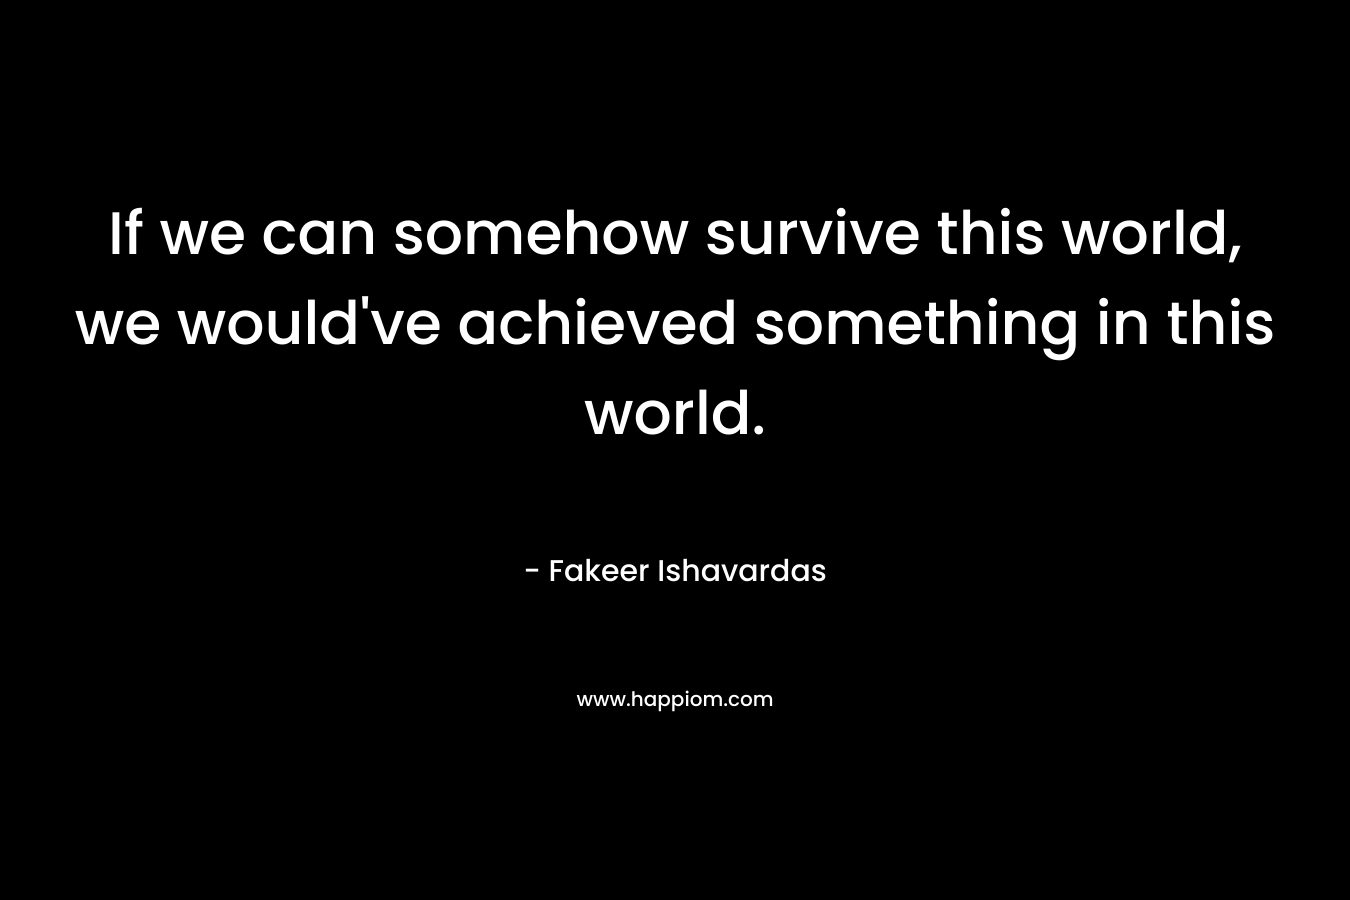 If we can somehow survive this world, we would’ve achieved something in this world. – Fakeer Ishavardas